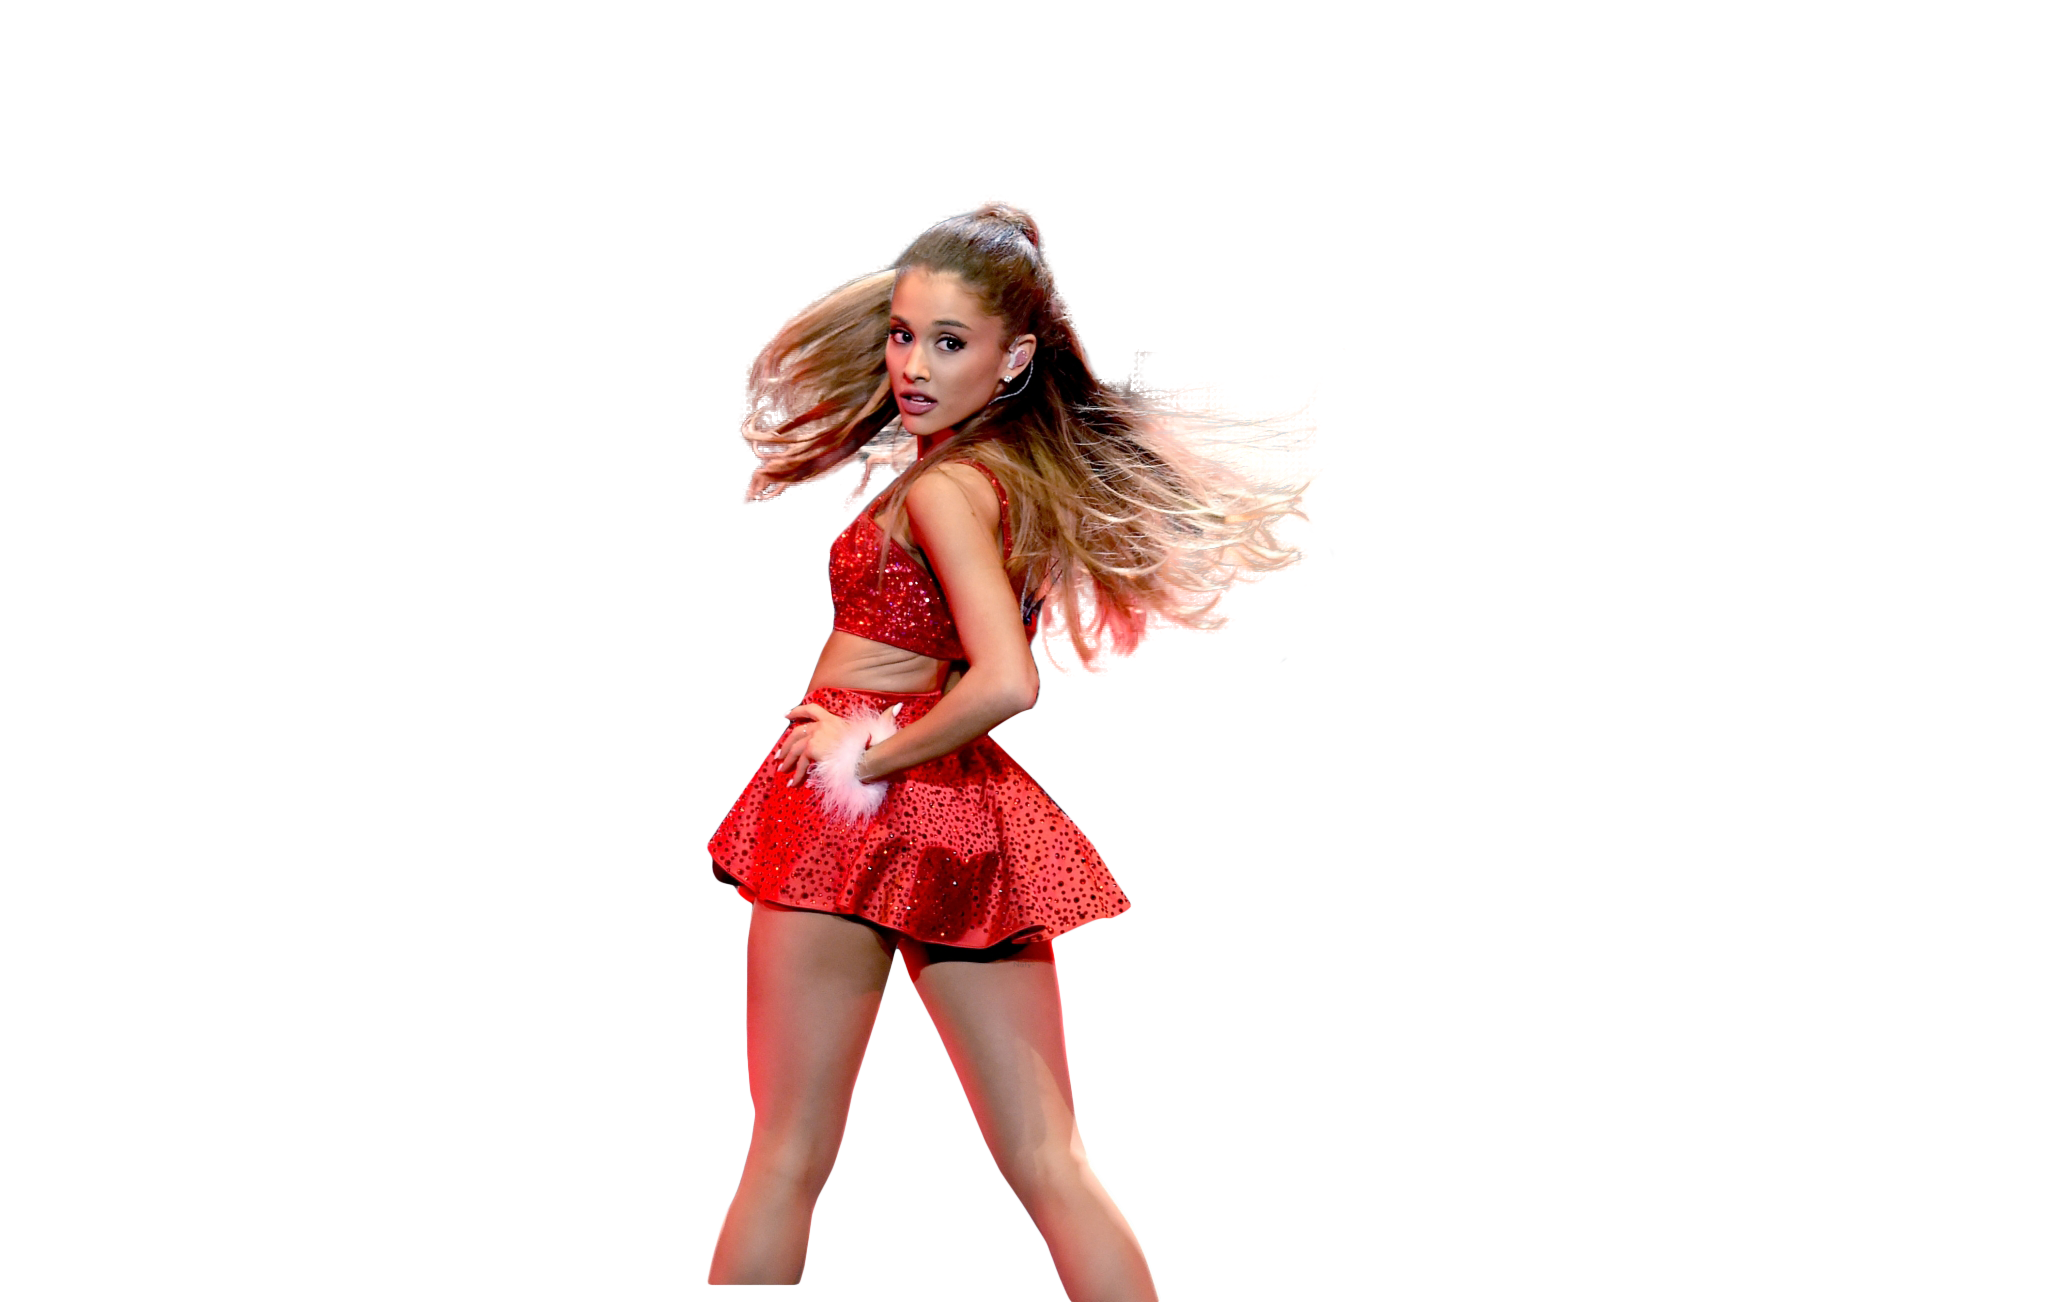 Ariana Grande dancing on stage PNG Image